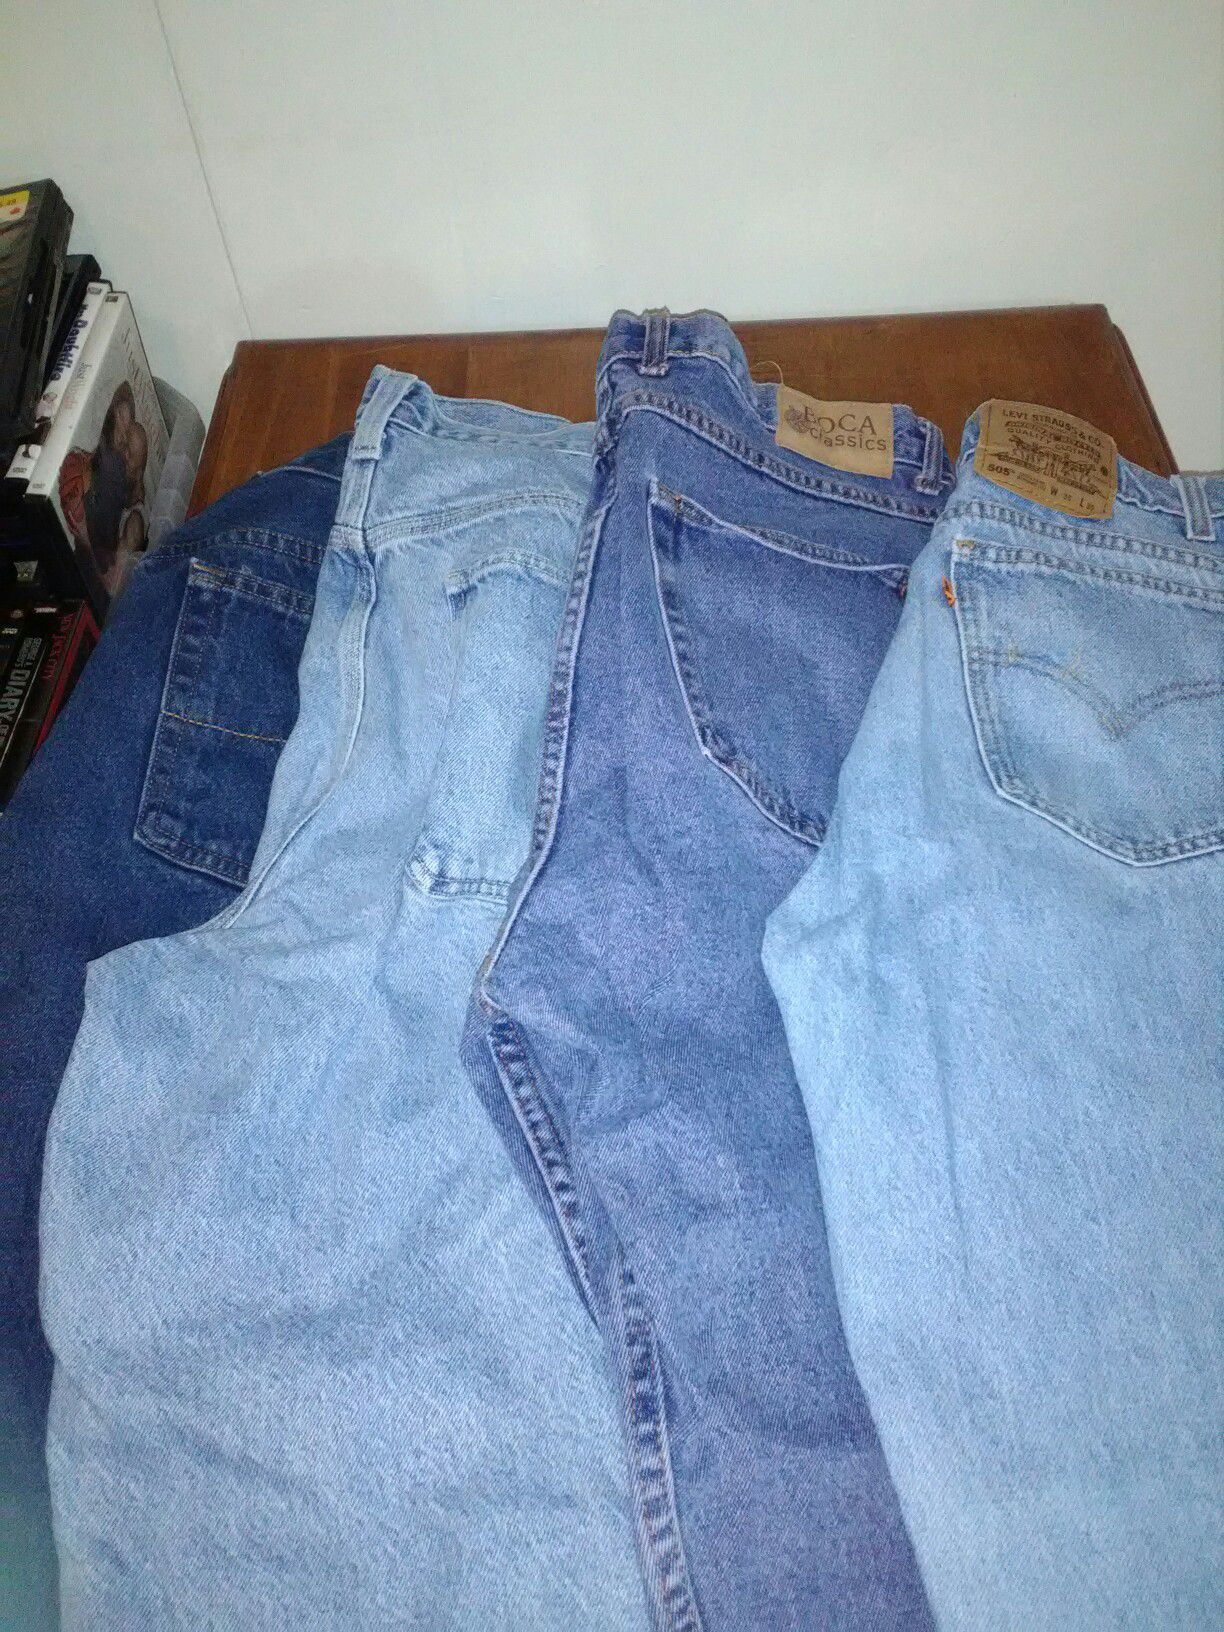 3 pairs of jeans 36 waist